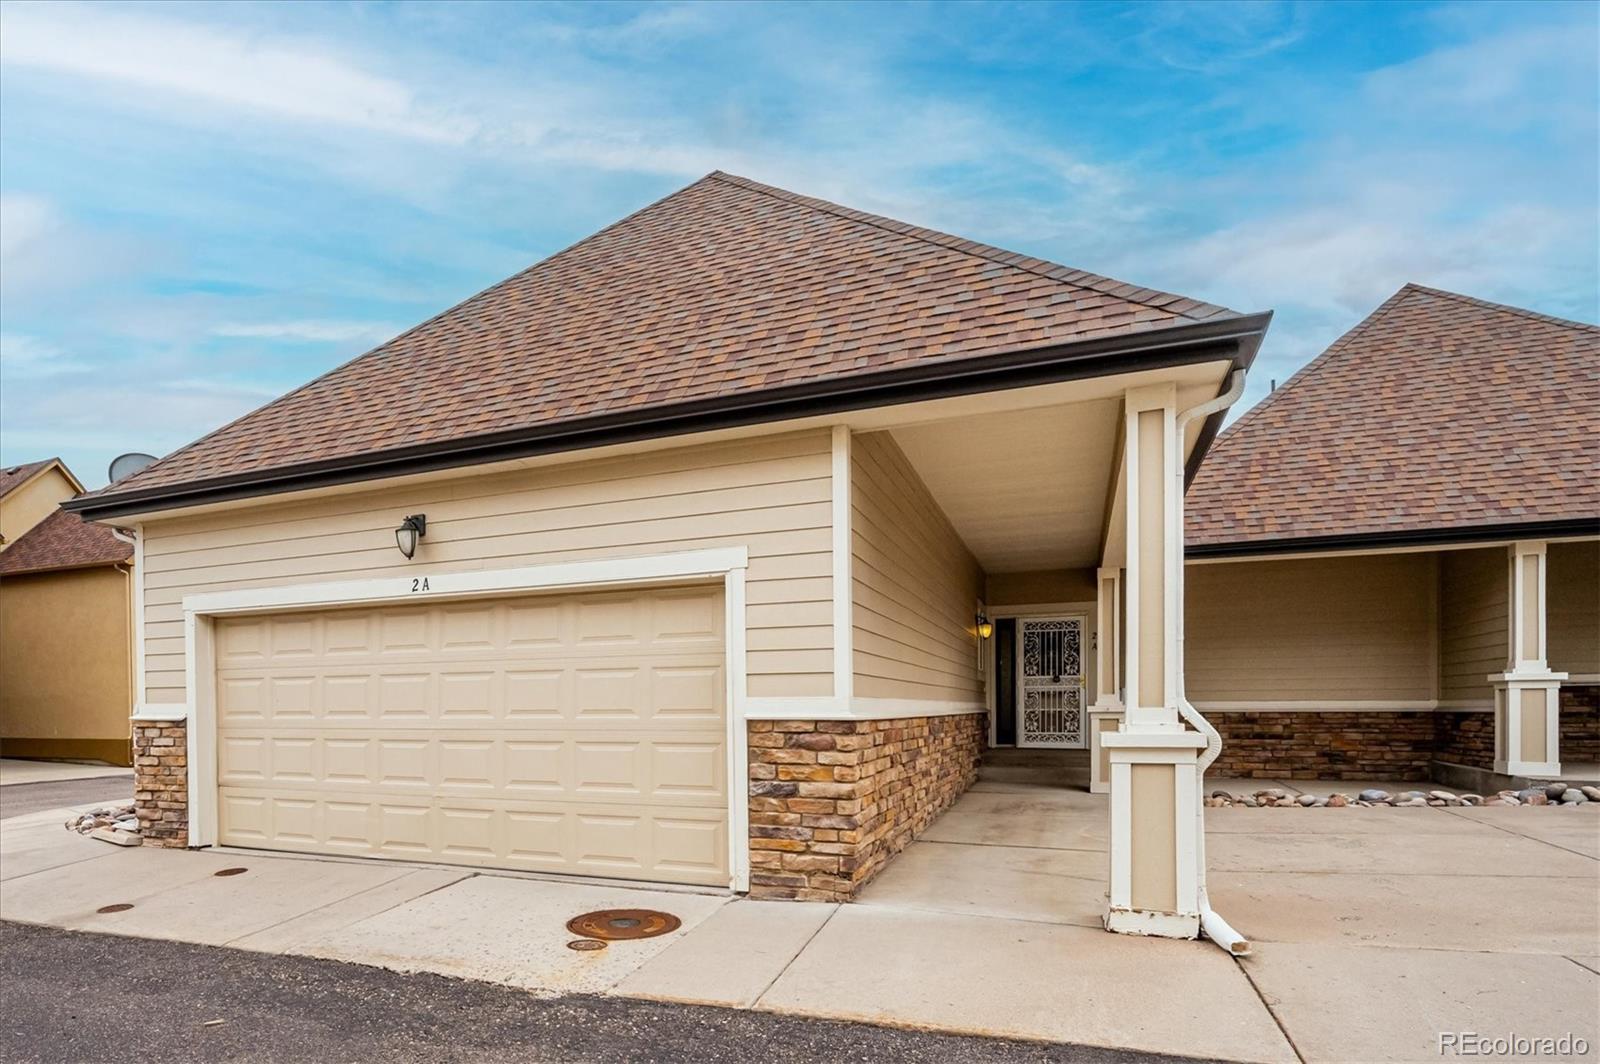 Photo one of 9791 W Stanford Ave # 2A Littleton CO 80123 | MLS 4738075